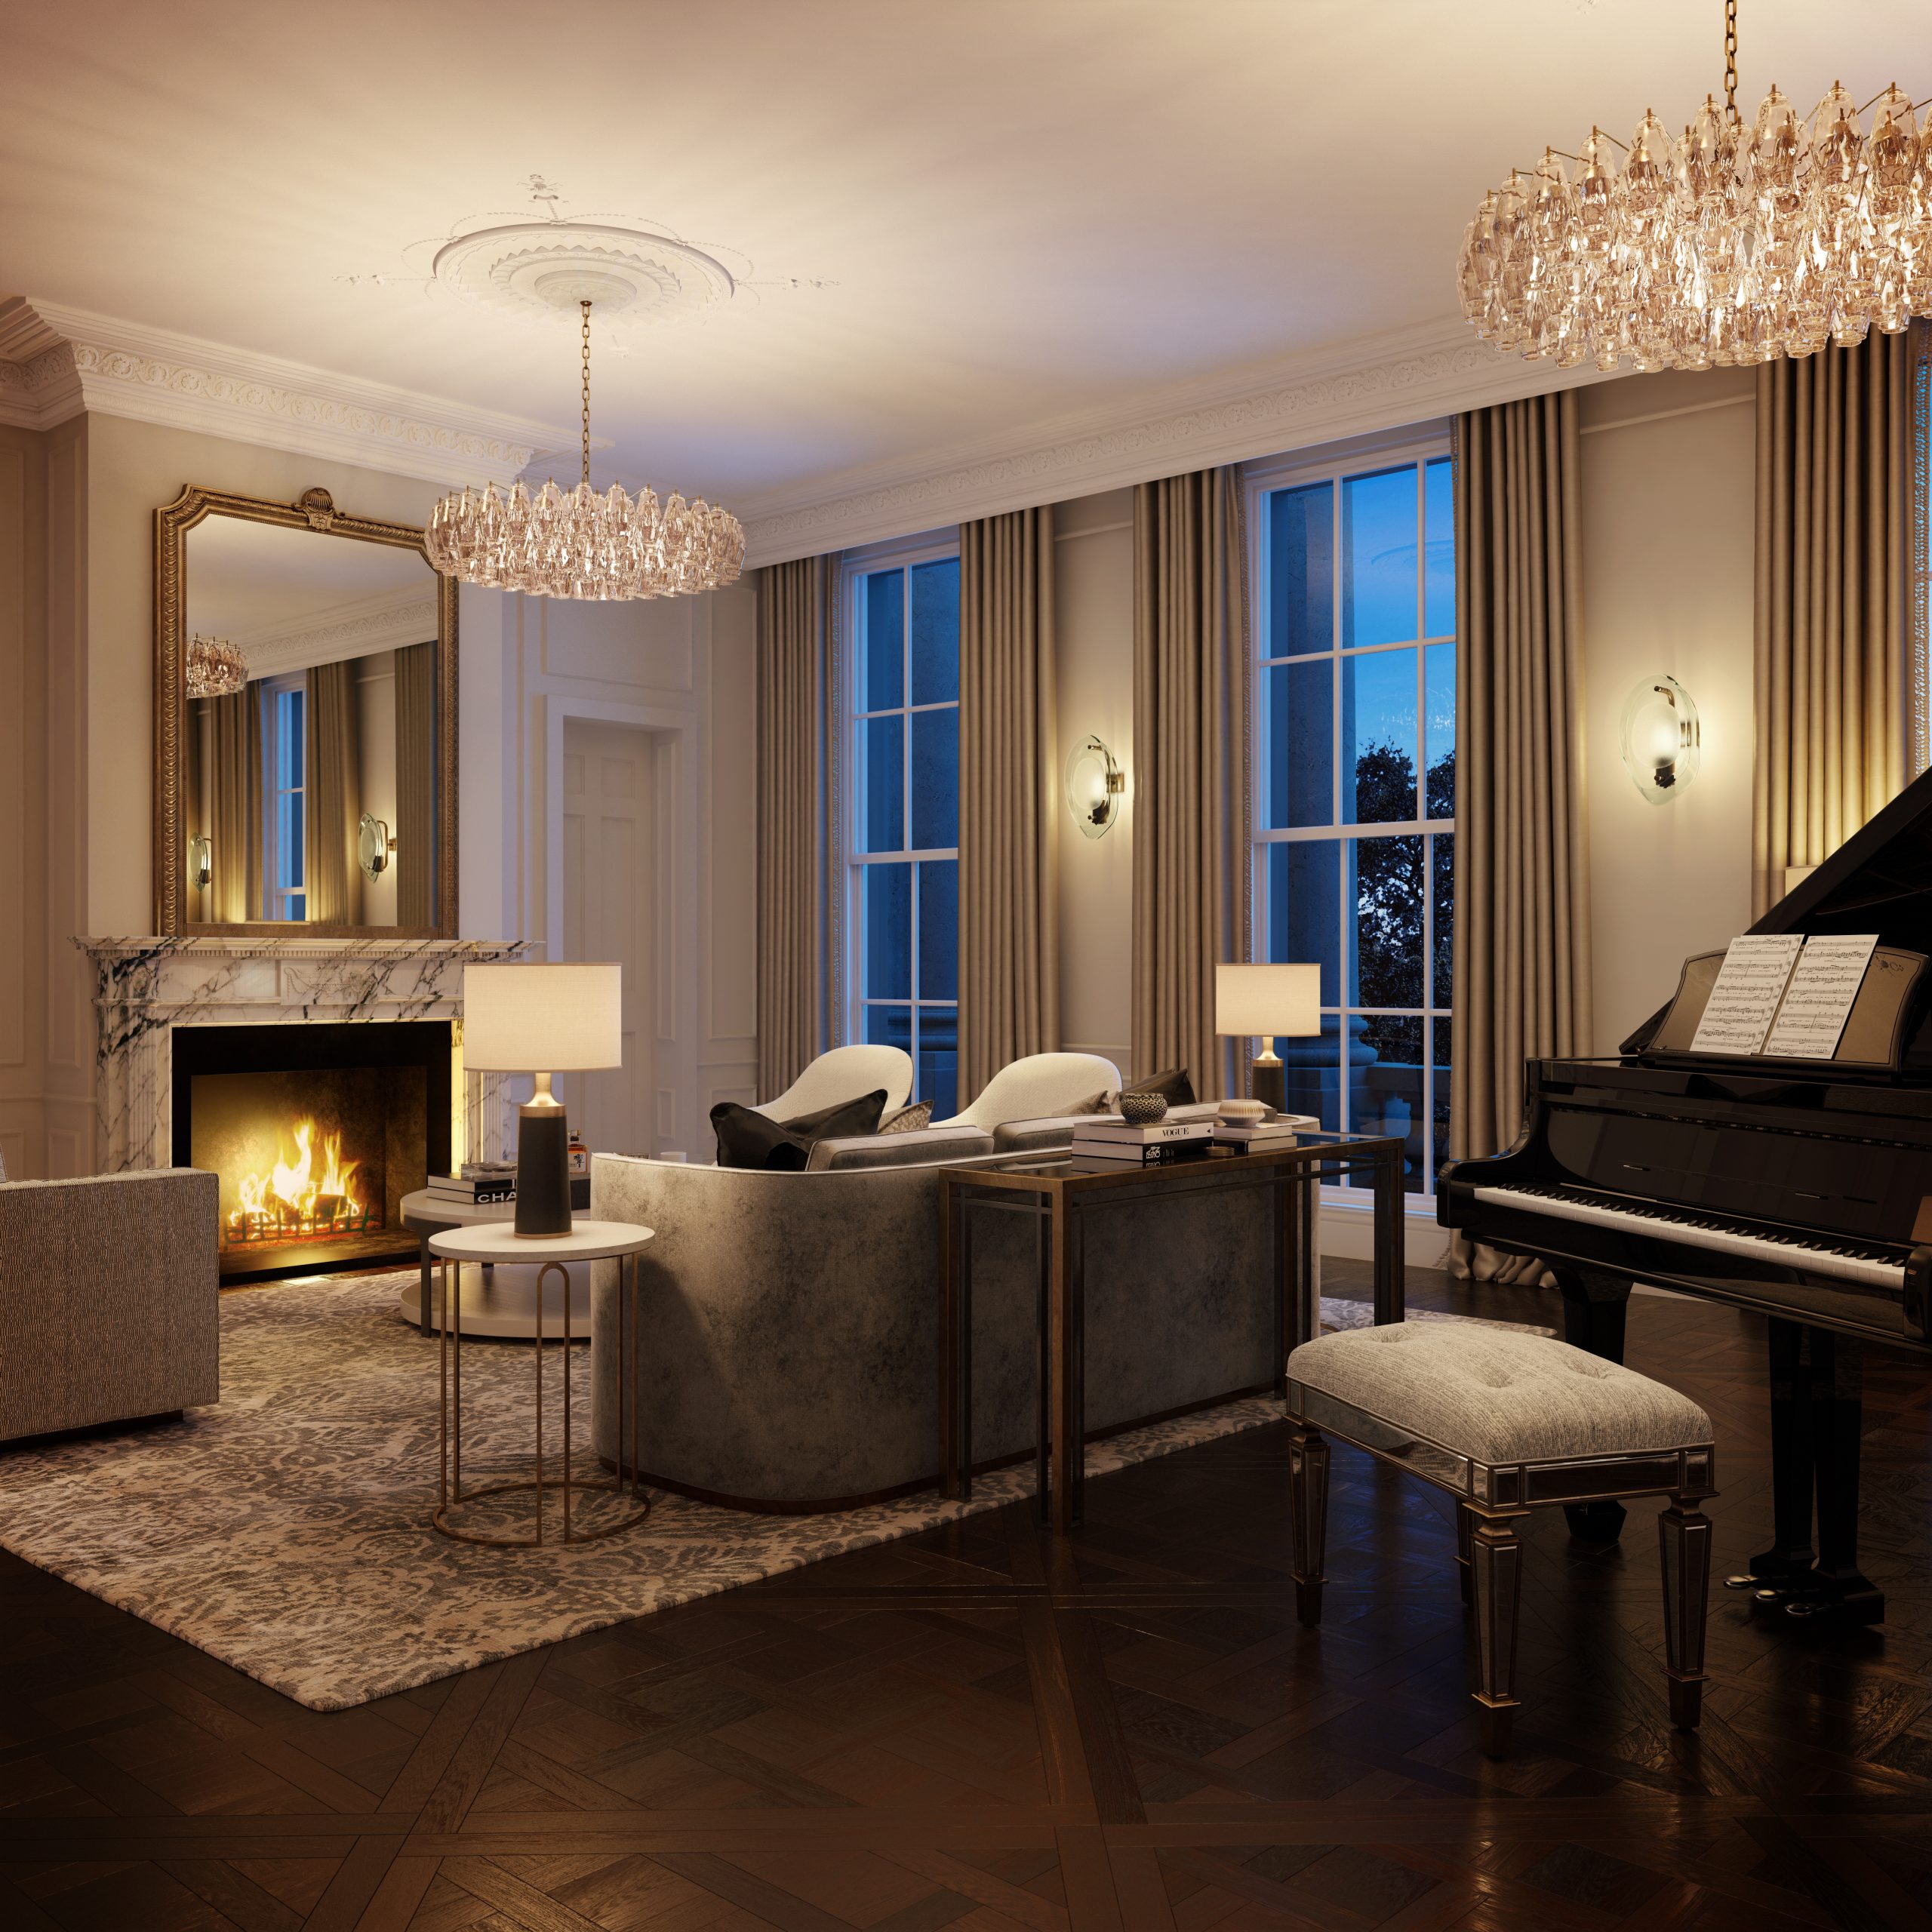 Sumptuous drawing room with seating, crystal chandeliers and piano